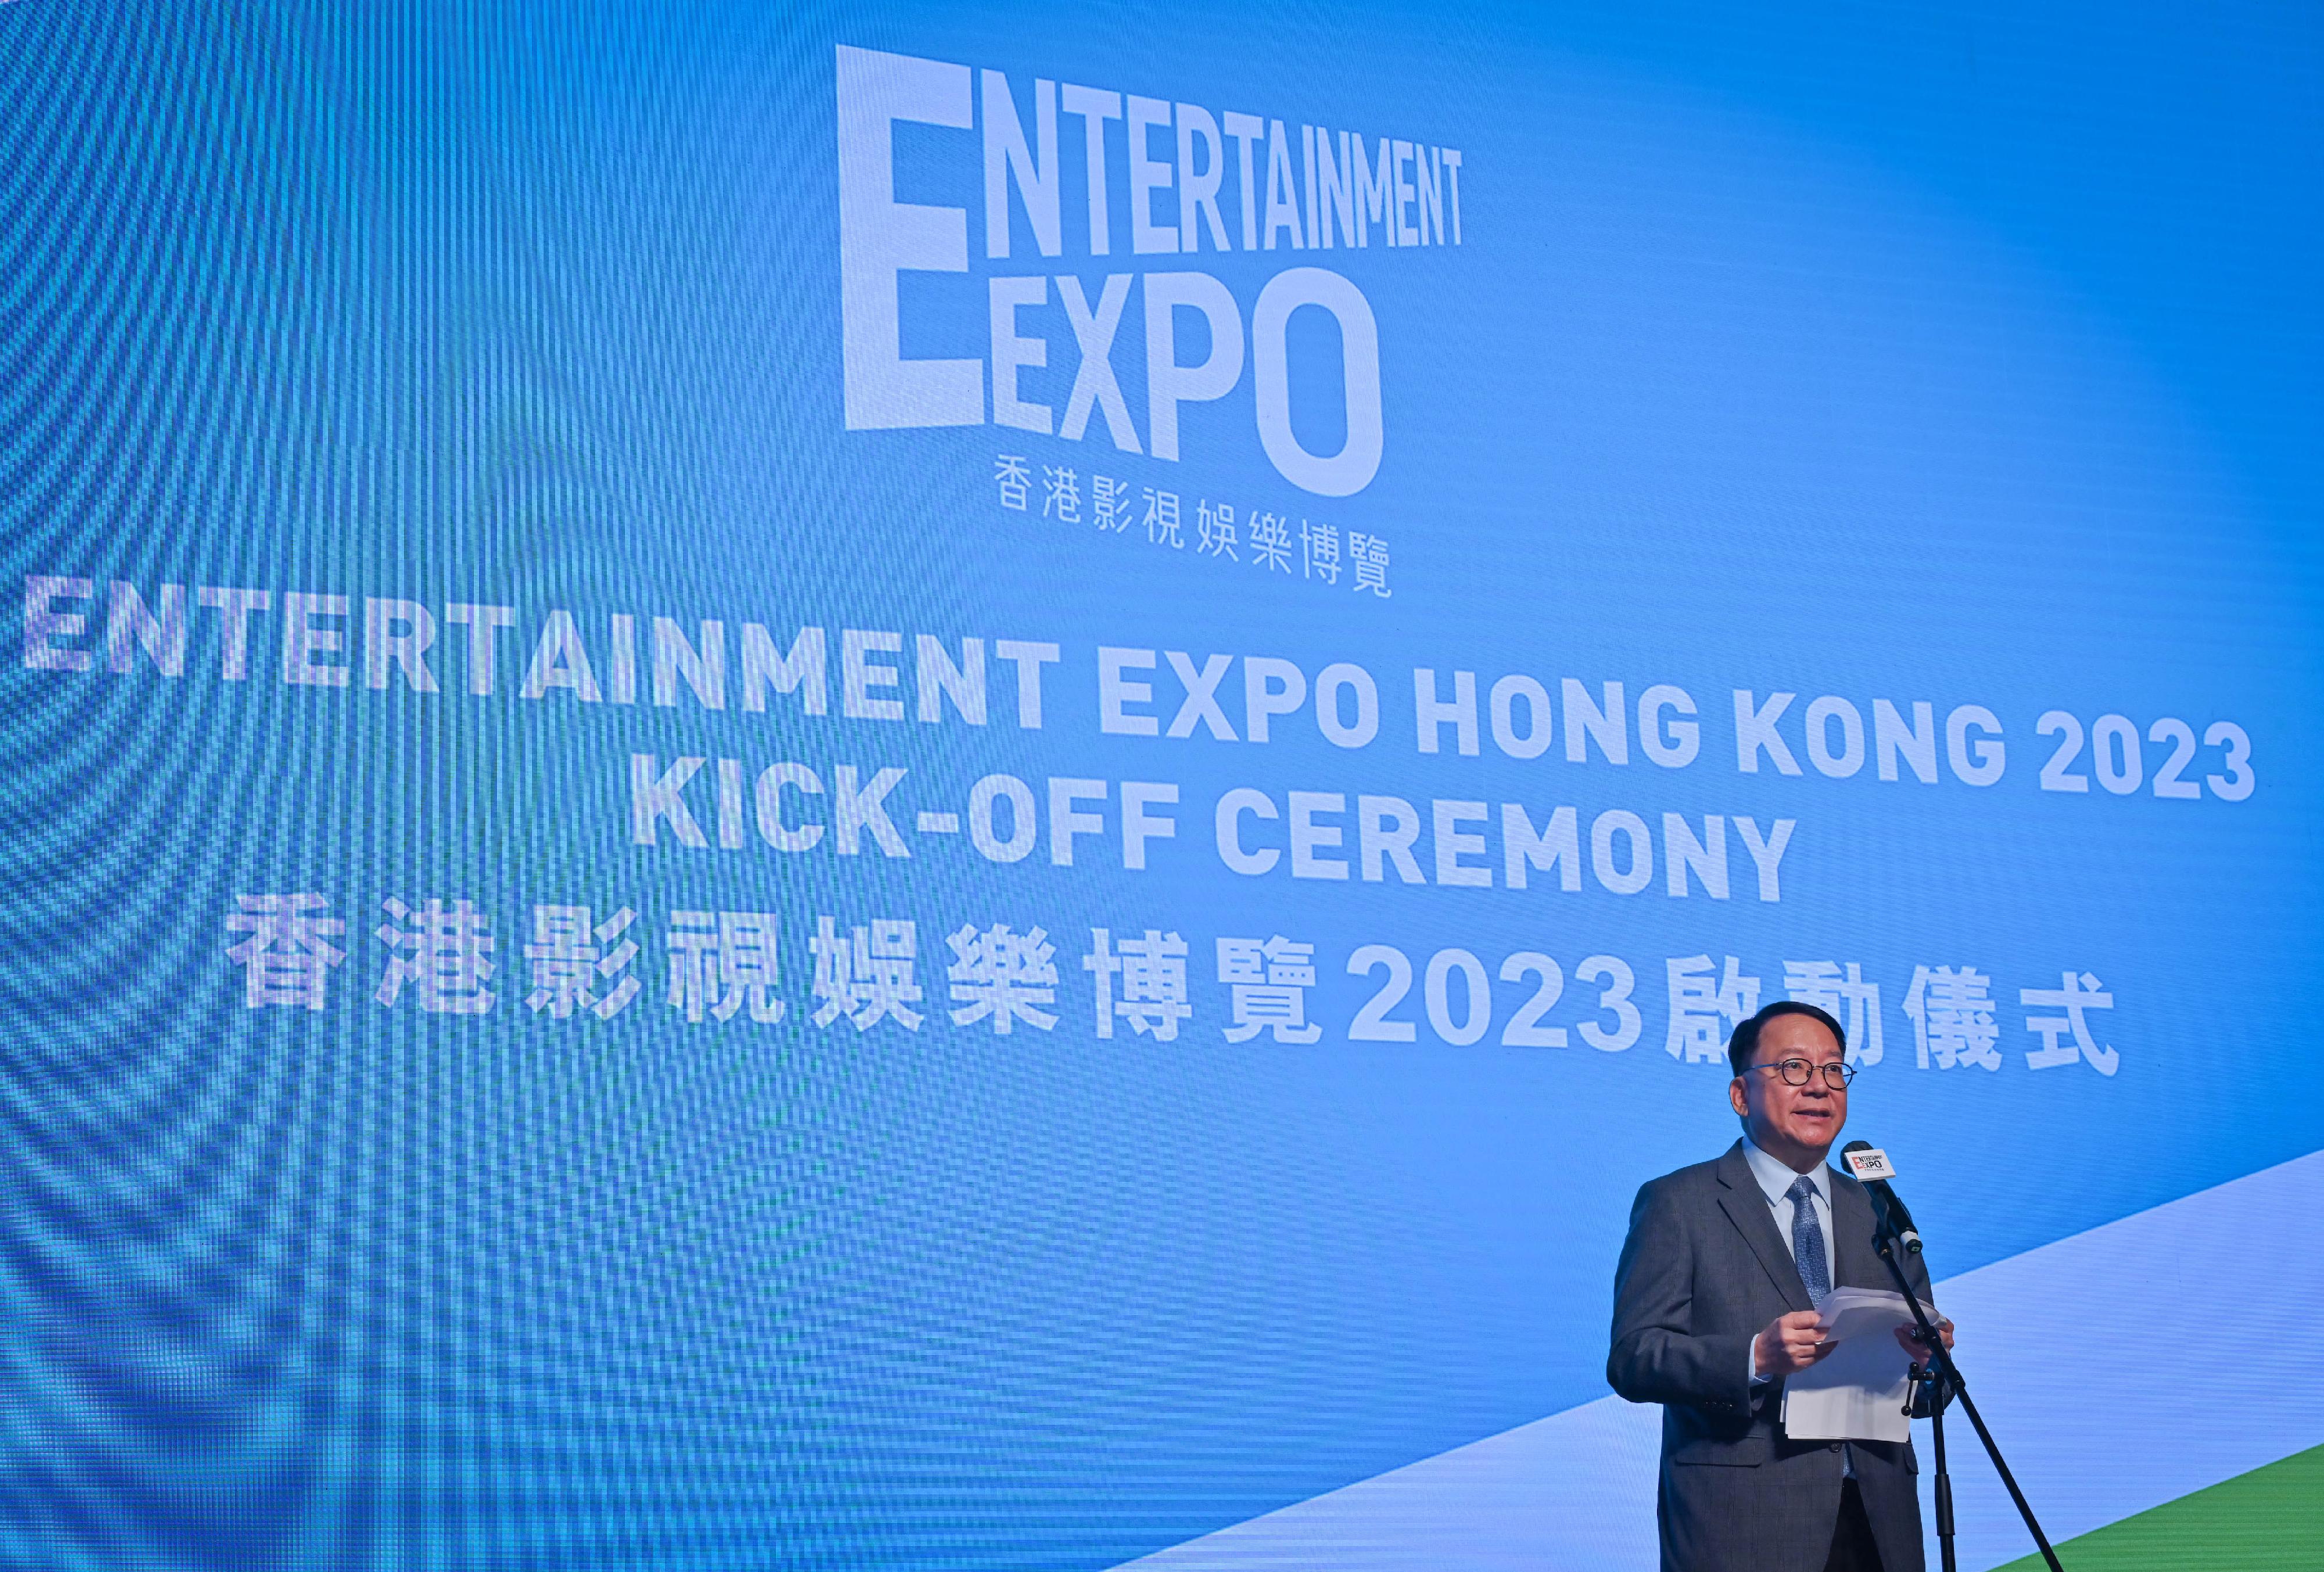 The Chief Secretary for Administration, Mr Chan Kwok-ki, speaks at the Kick-off Ceremony of the Entertainment Expo Hong Kong 2023 today (March 13).